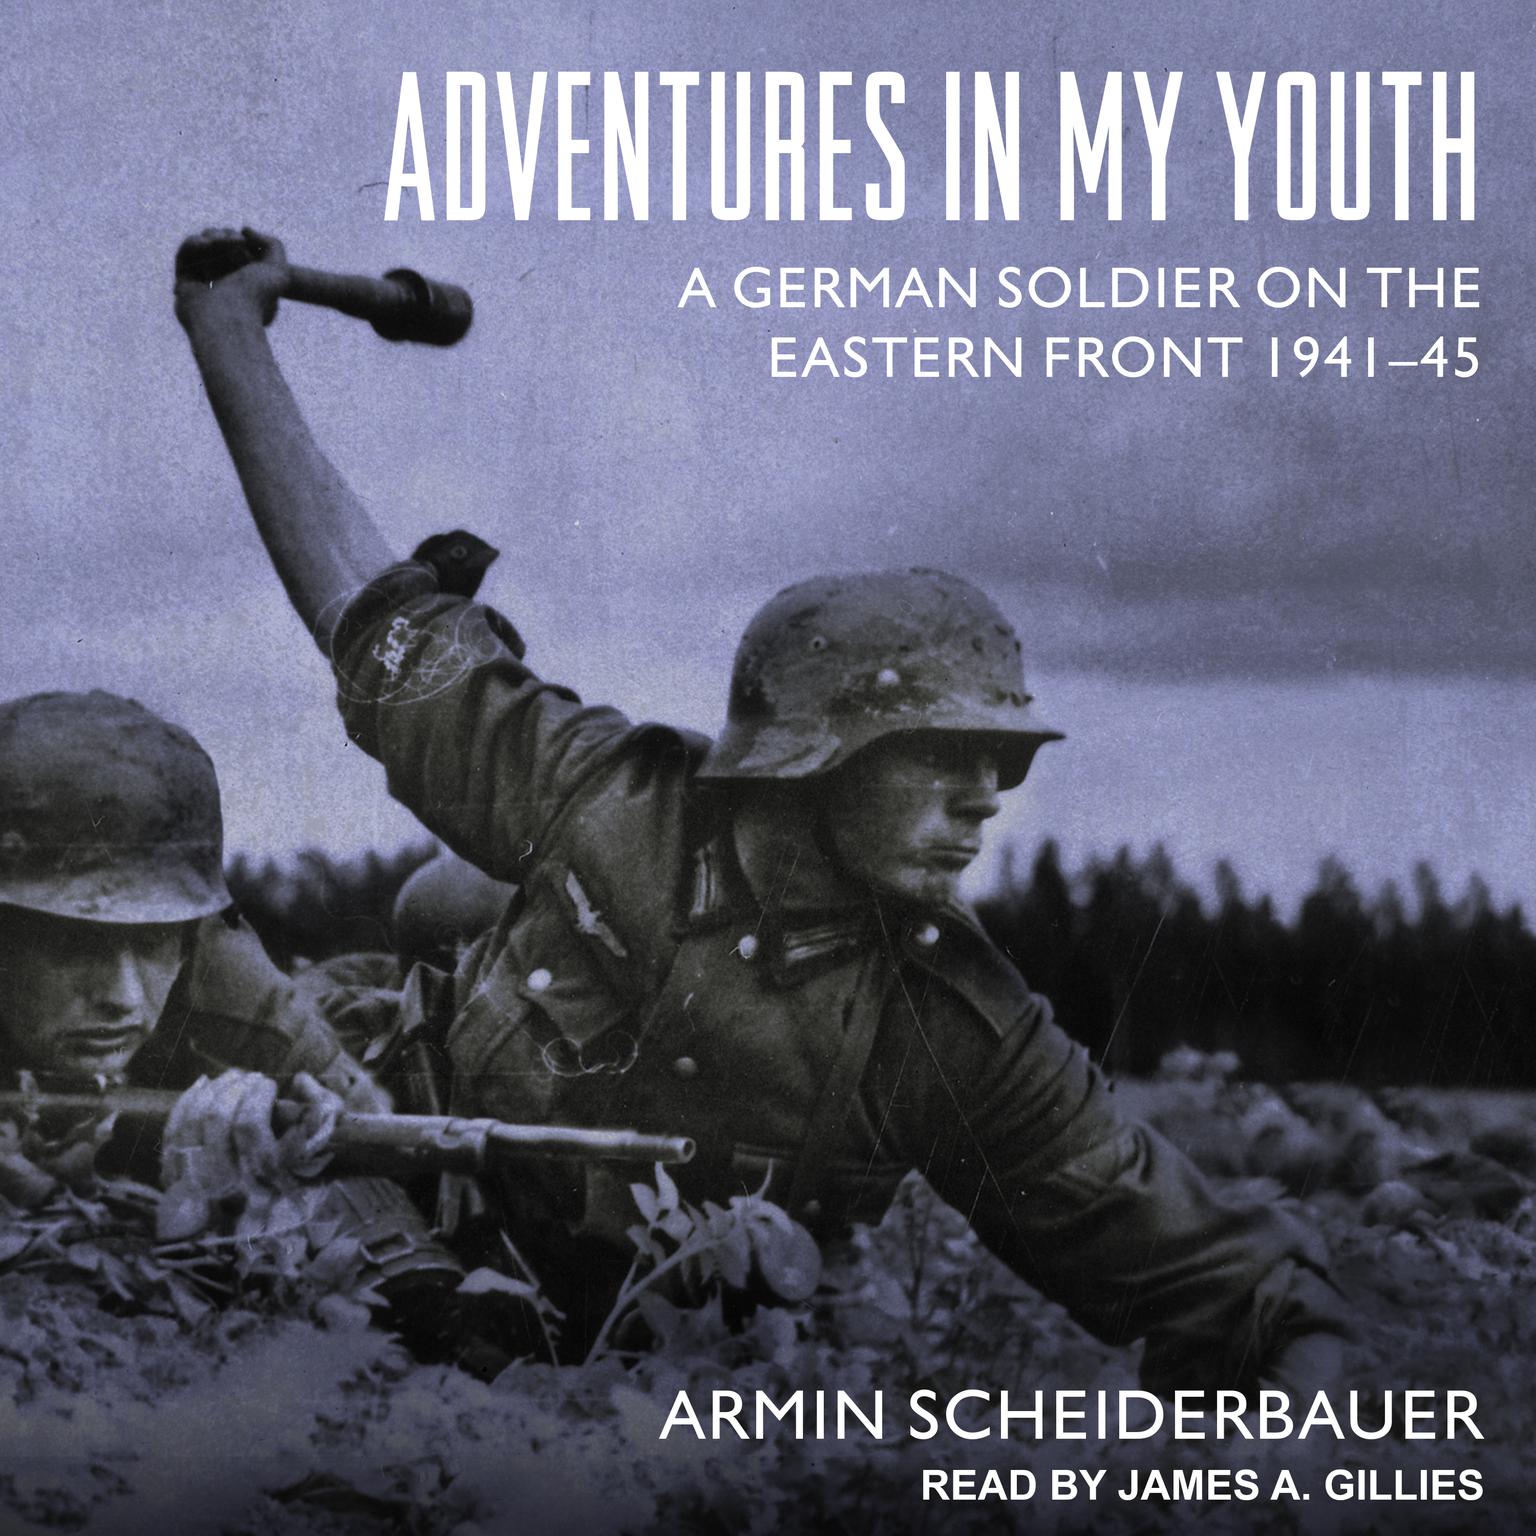 Adventures in My Youth: A German Soldier on the Eastern Front 1941-45 Audiobook, by Armin Scheiderbauer